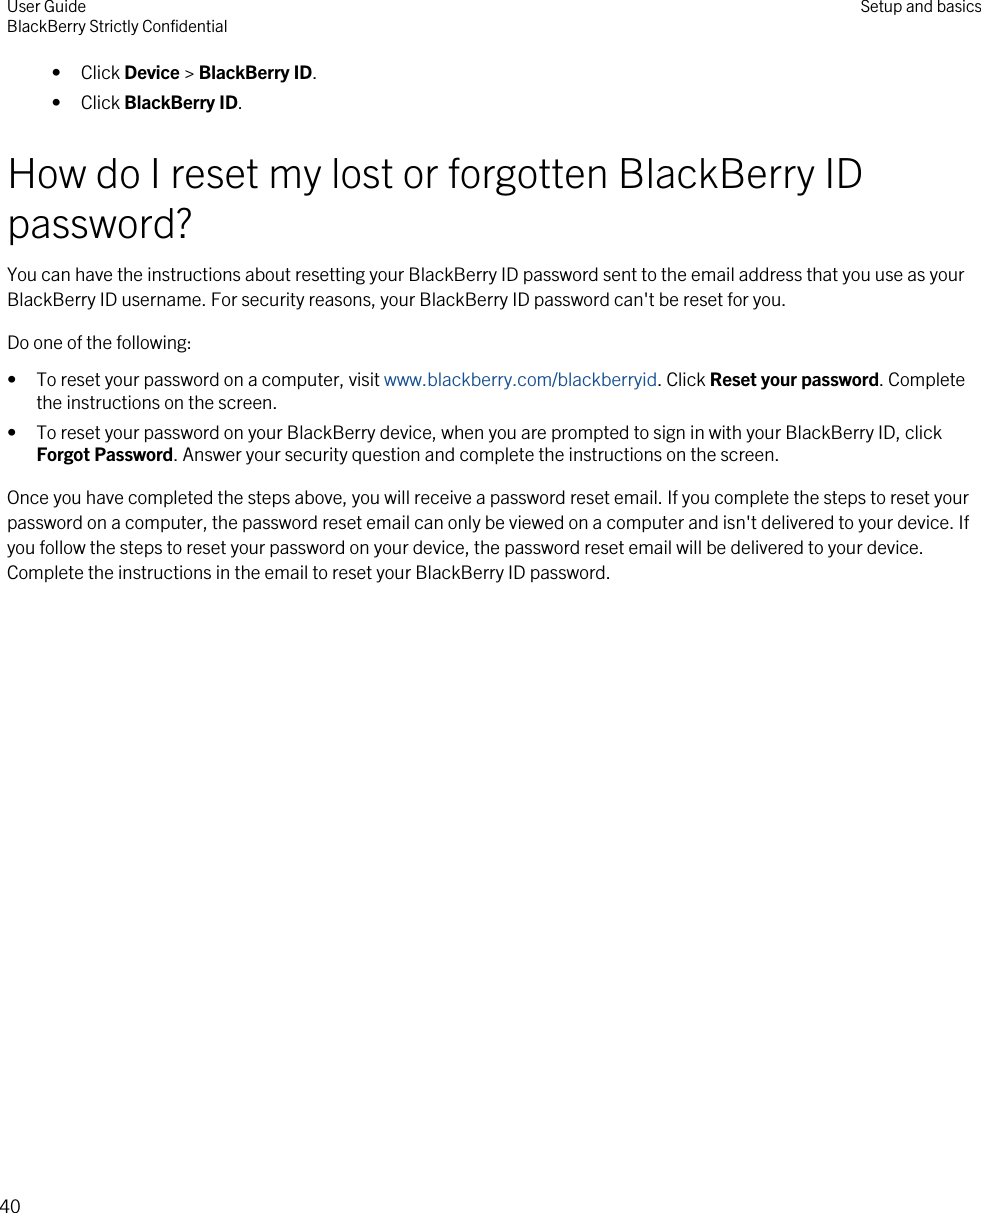 • Click Device &gt; BlackBerry ID.• Click BlackBerry ID.How do I reset my lost or forgotten BlackBerry ID password?You can have the instructions about resetting your BlackBerry ID password sent to the email address that you use as your BlackBerry ID username. For security reasons, your BlackBerry ID password can&apos;t be reset for you.Do one of the following:• To reset your password on a computer, visit www.blackberry.com/blackberryid. Click Reset your password. Complete the instructions on the screen.• To reset your password on your BlackBerry device, when you are prompted to sign in with your BlackBerry ID, click Forgot Password. Answer your security question and complete the instructions on the screen.Once you have completed the steps above, you will receive a password reset email. If you complete the steps to reset your password on a computer, the password reset email can only be viewed on a computer and isn&apos;t delivered to your device. If you follow the steps to reset your password on your device, the password reset email will be delivered to your device. Complete the instructions in the email to reset your BlackBerry ID password.User GuideBlackBerry Strictly Confidential Setup and basics40